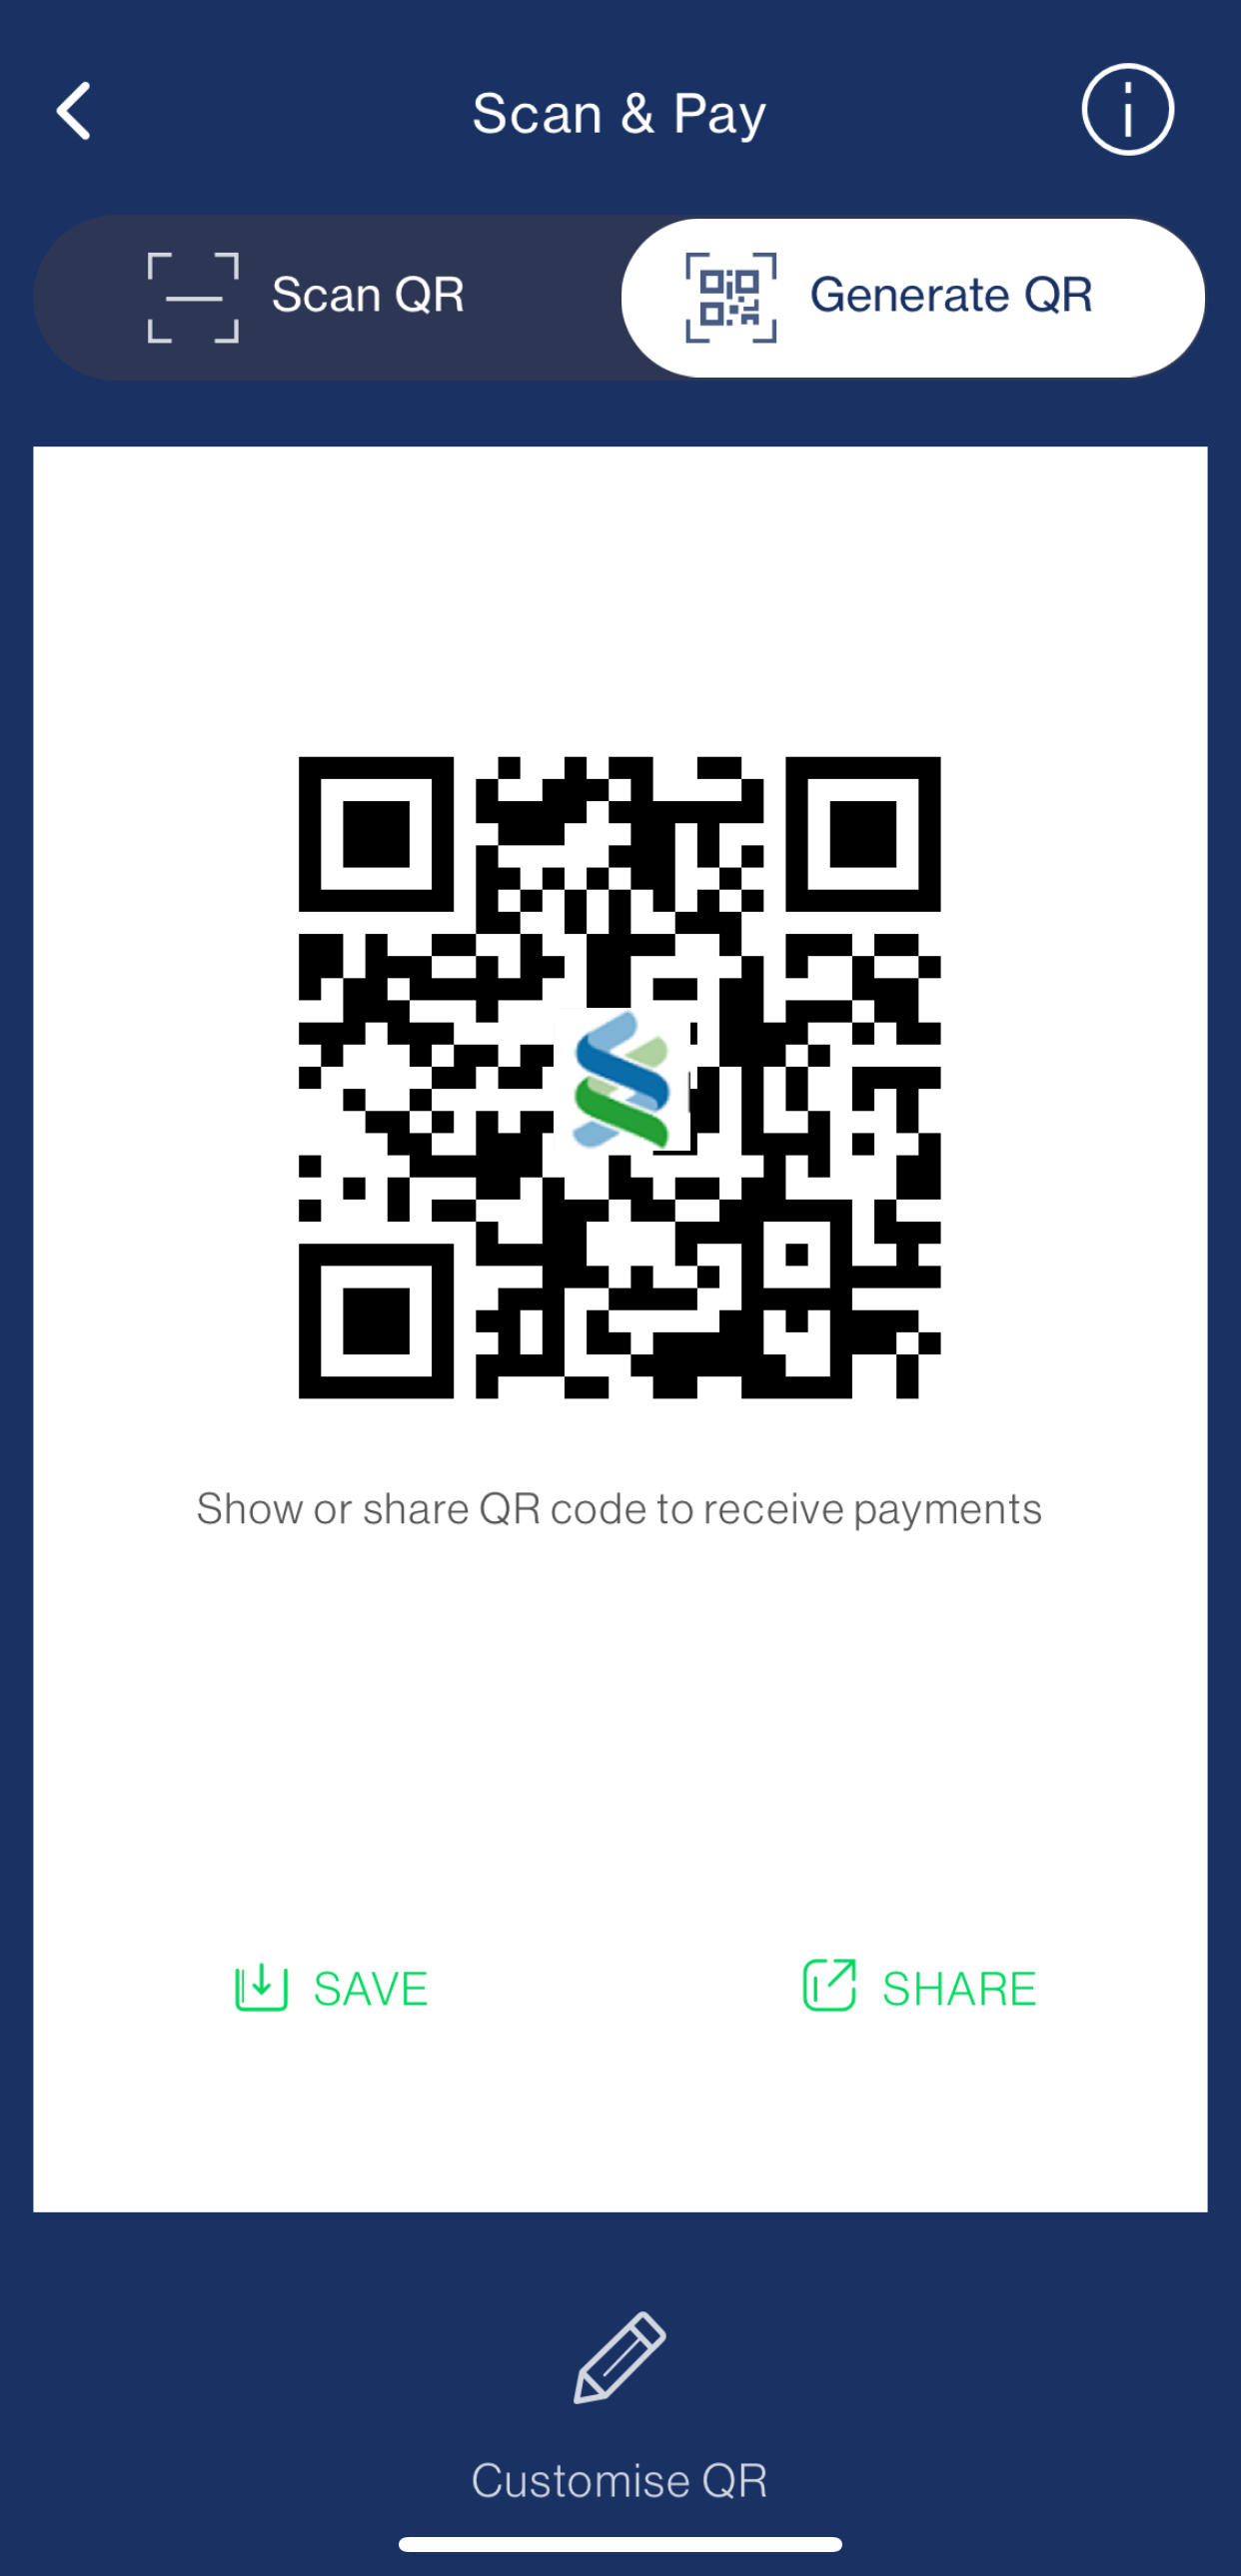 Tap ‘Generate QR’ and share for receiving money. If you wish to specify the amount, tap ‘Customise QR’.